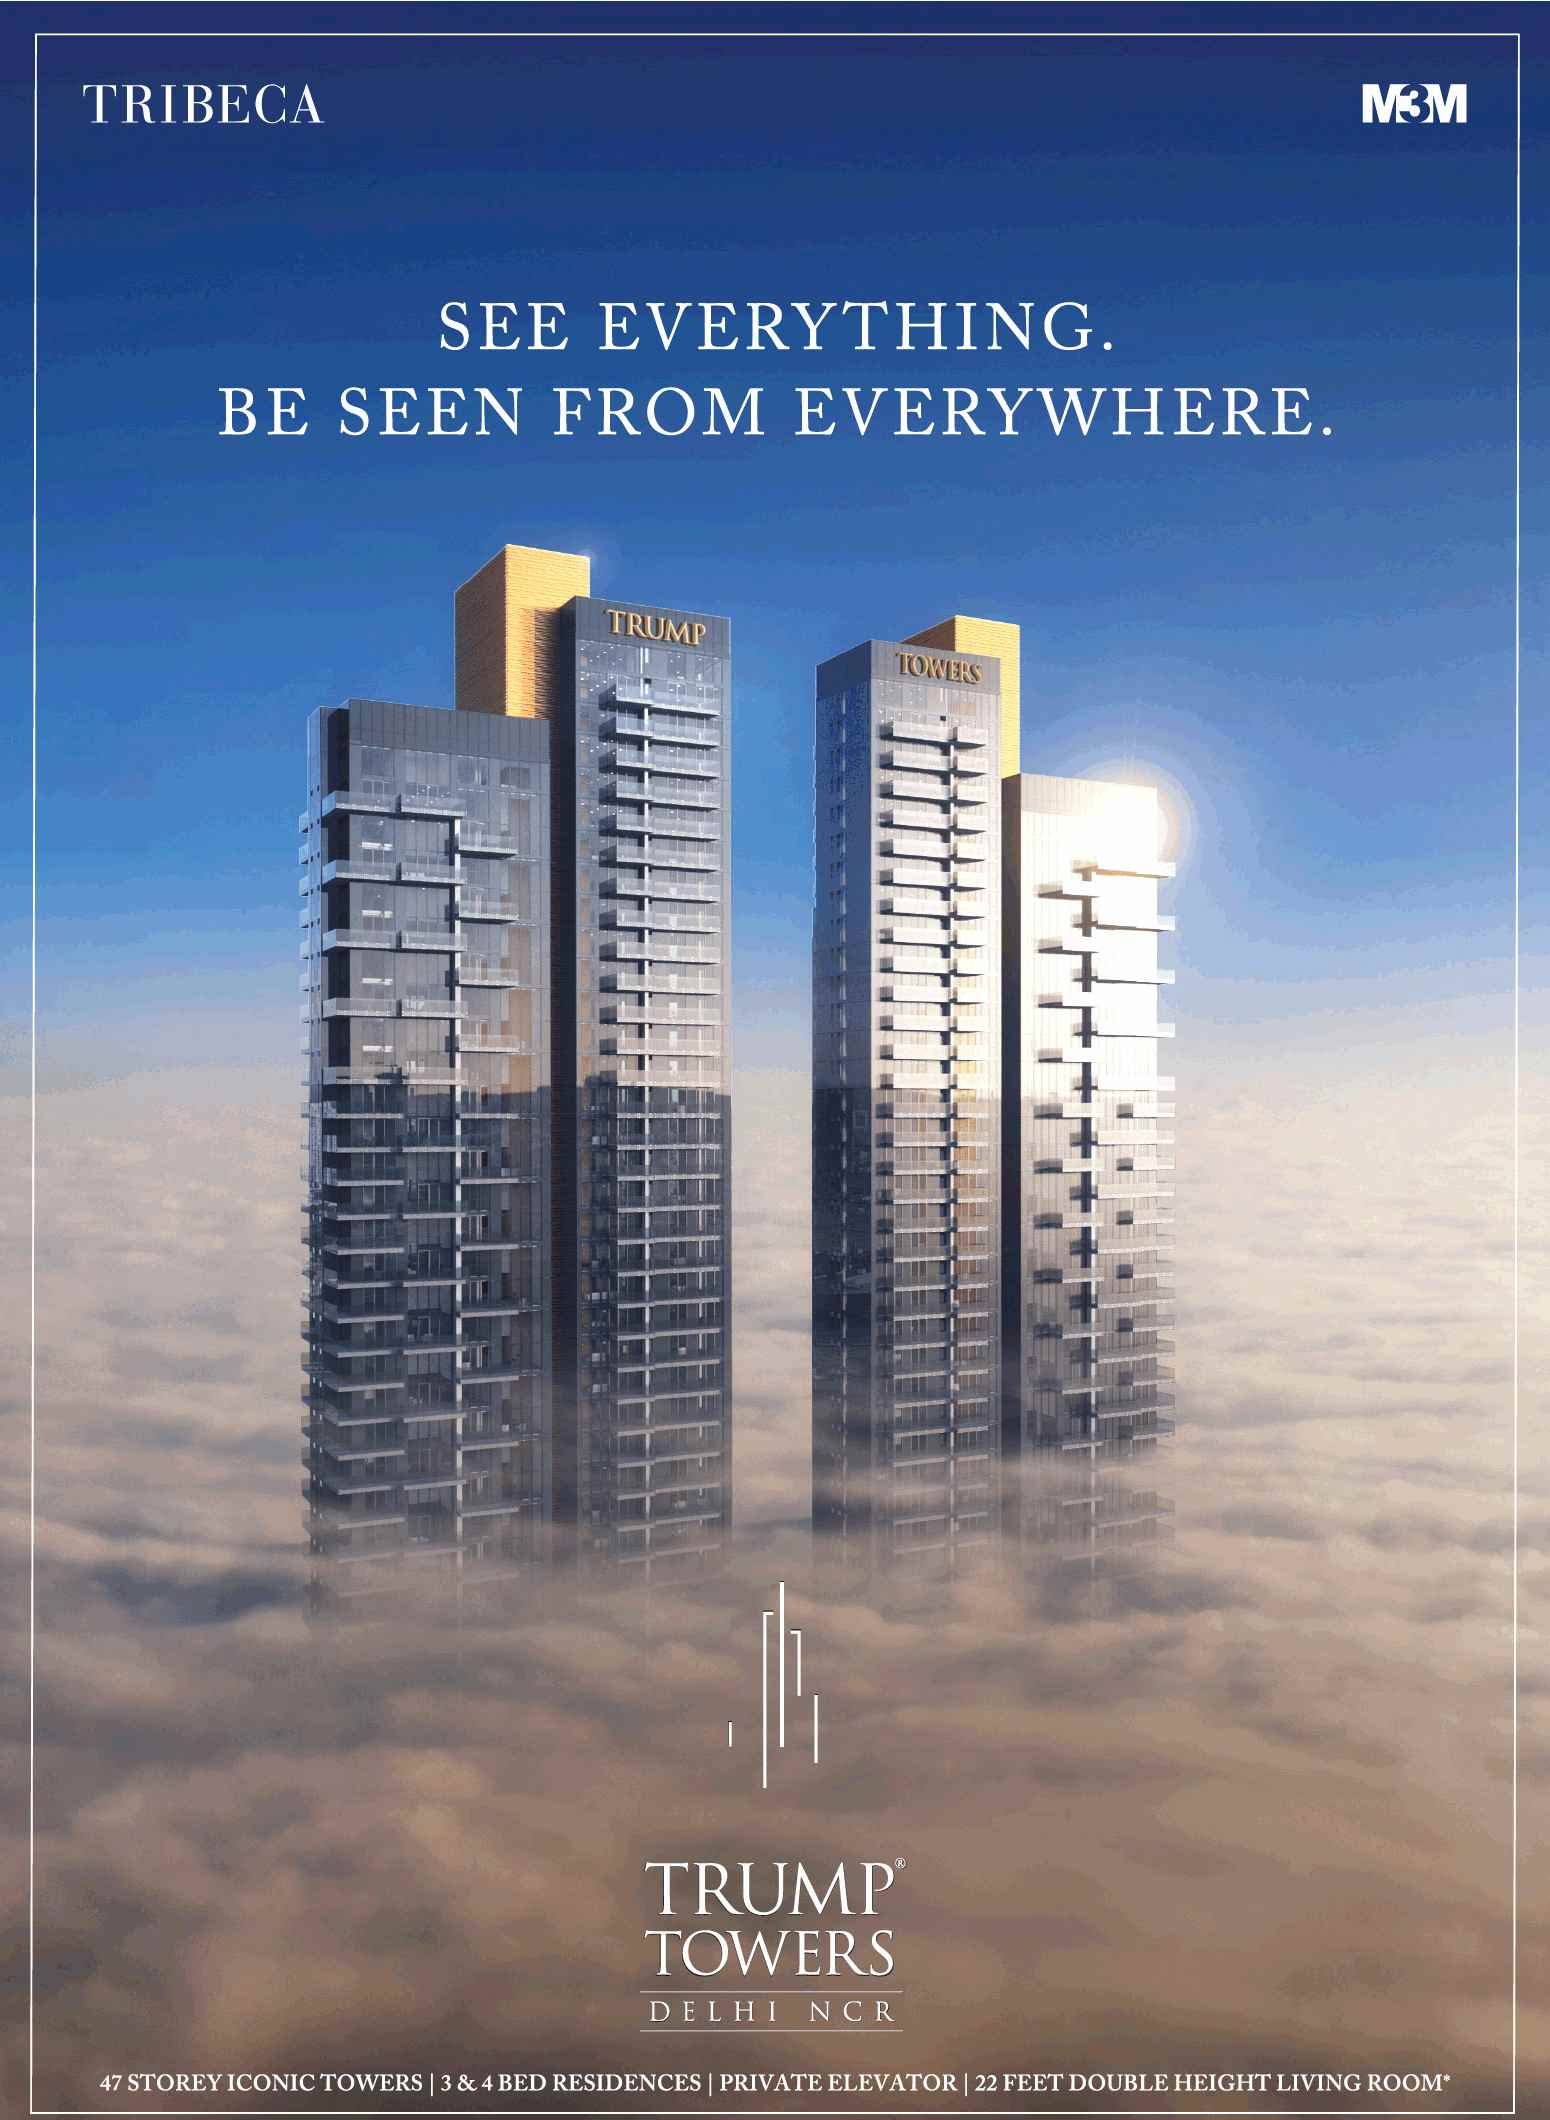 See everything & be seen from everywhere at Trump Towers in Gurgaon Update